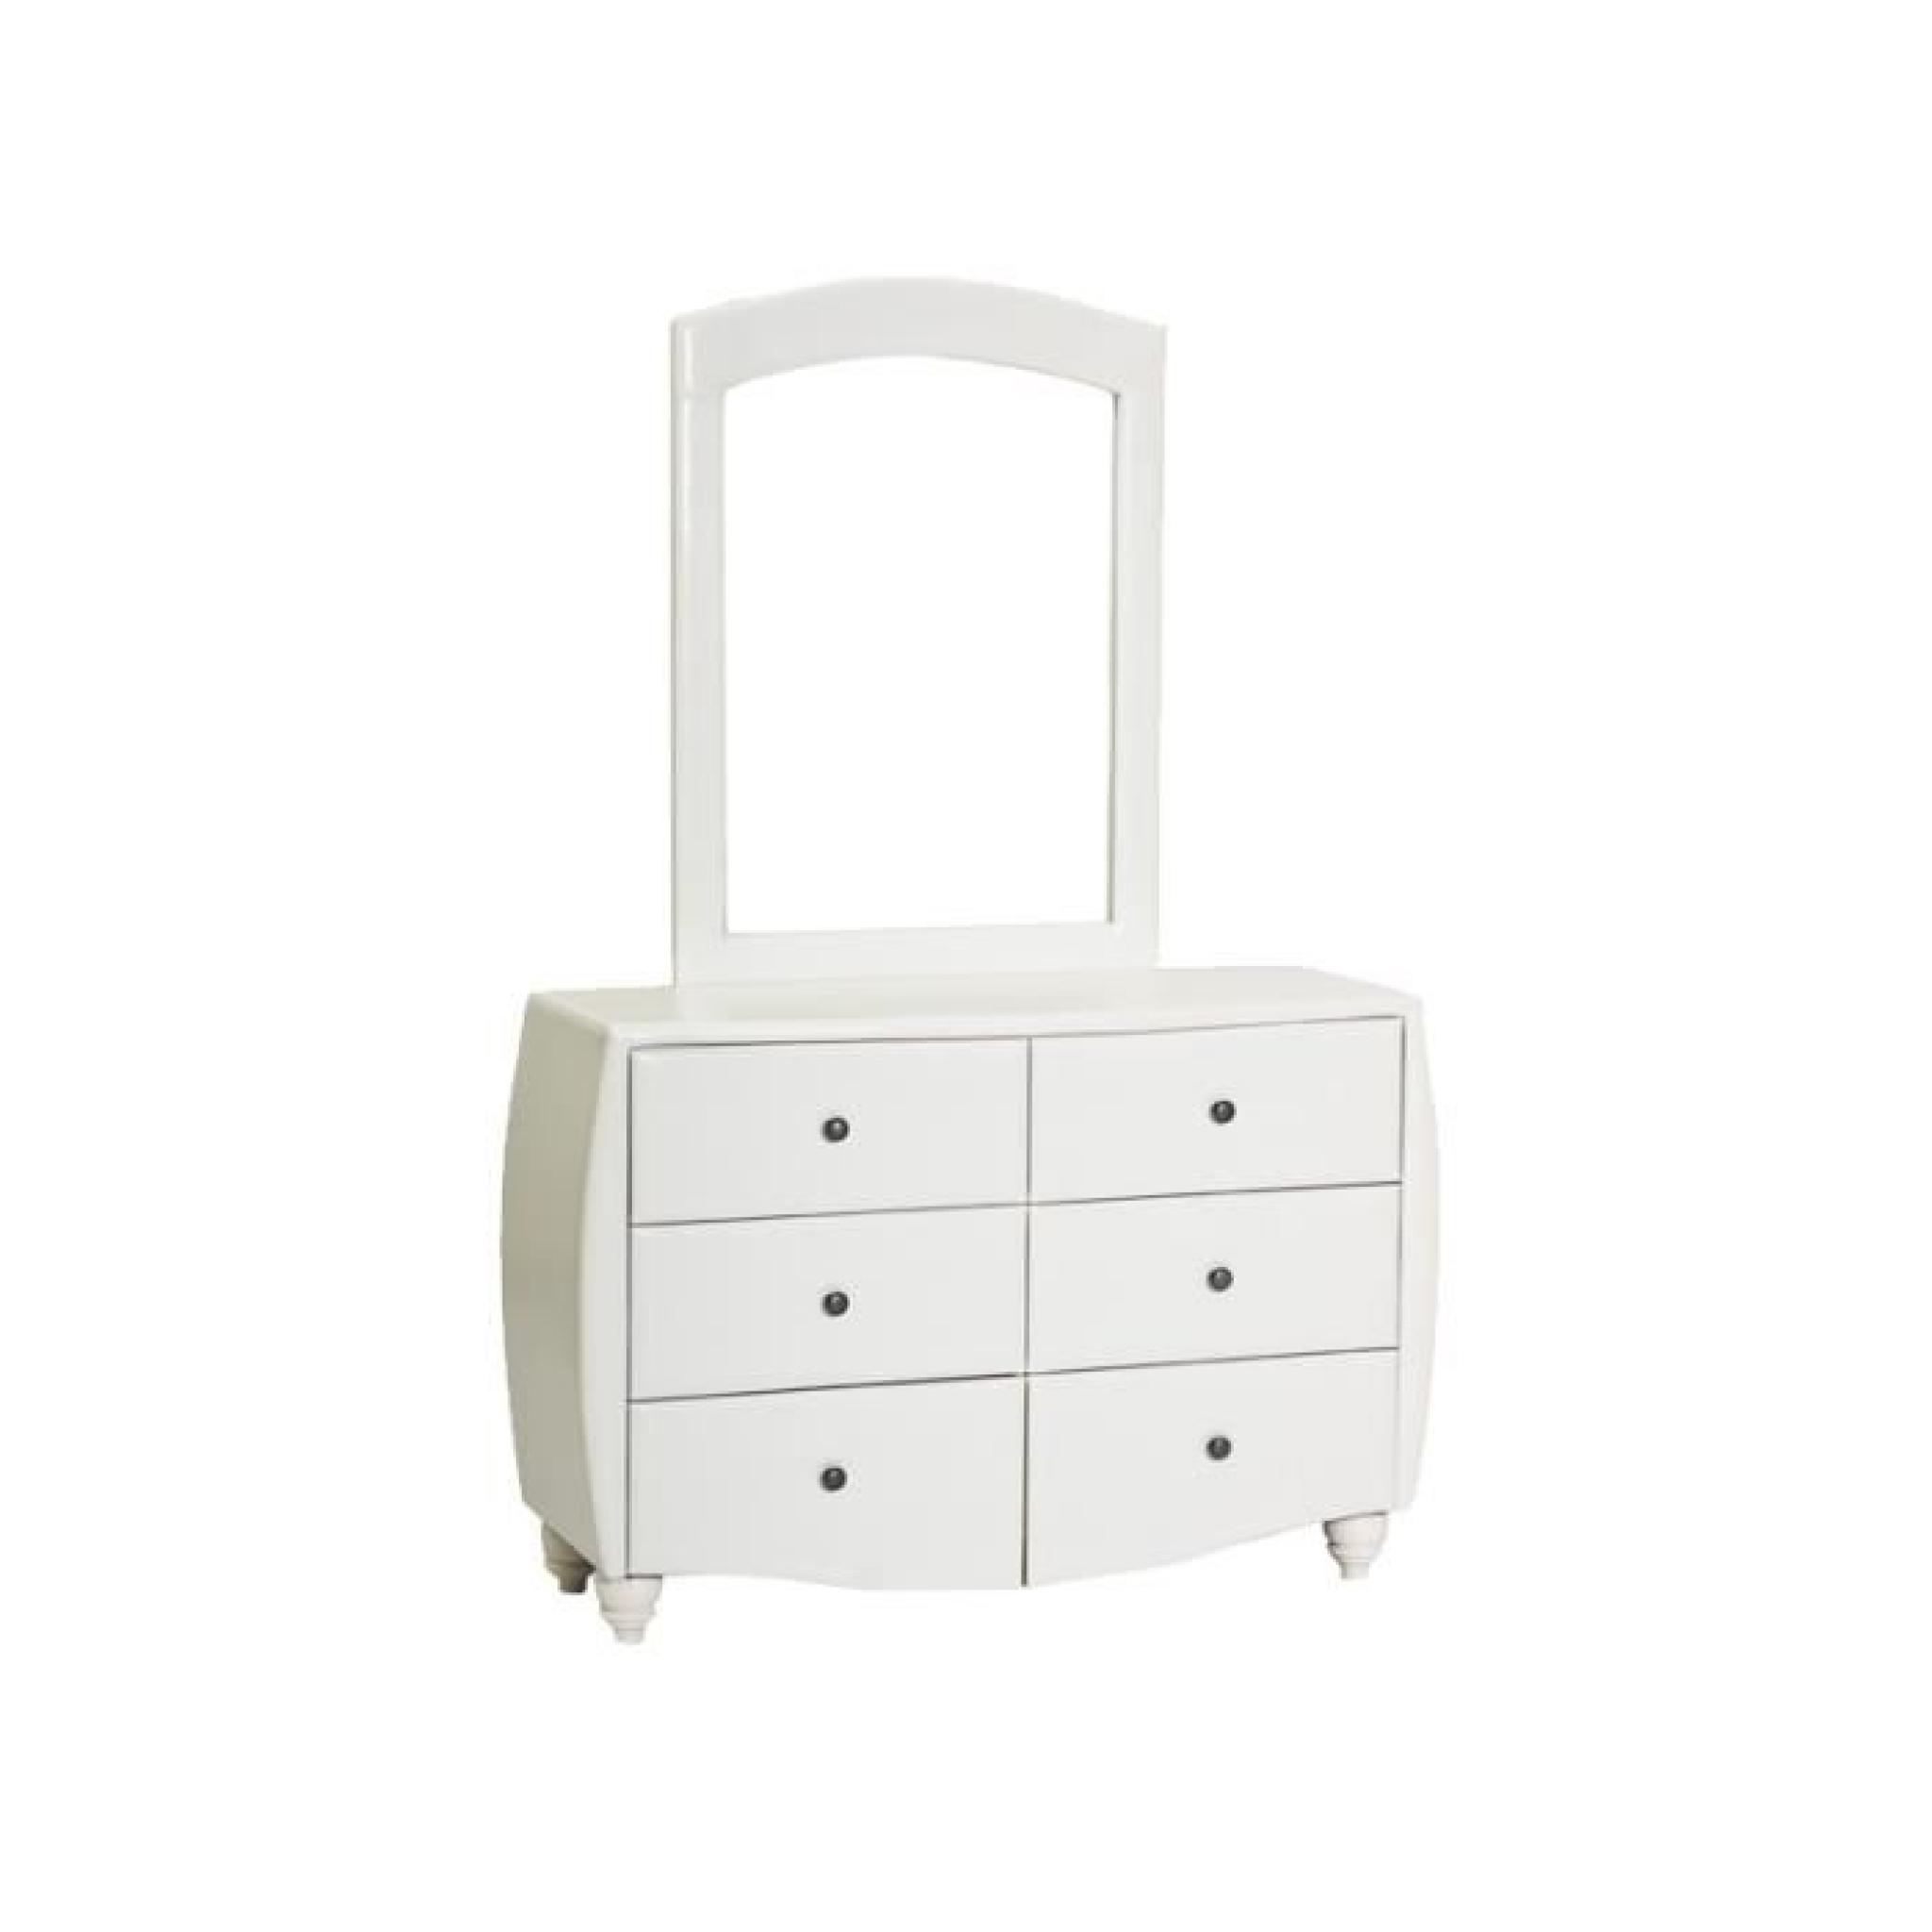 JUSThome Potenza Commode Blanc 80 x 47 x 120